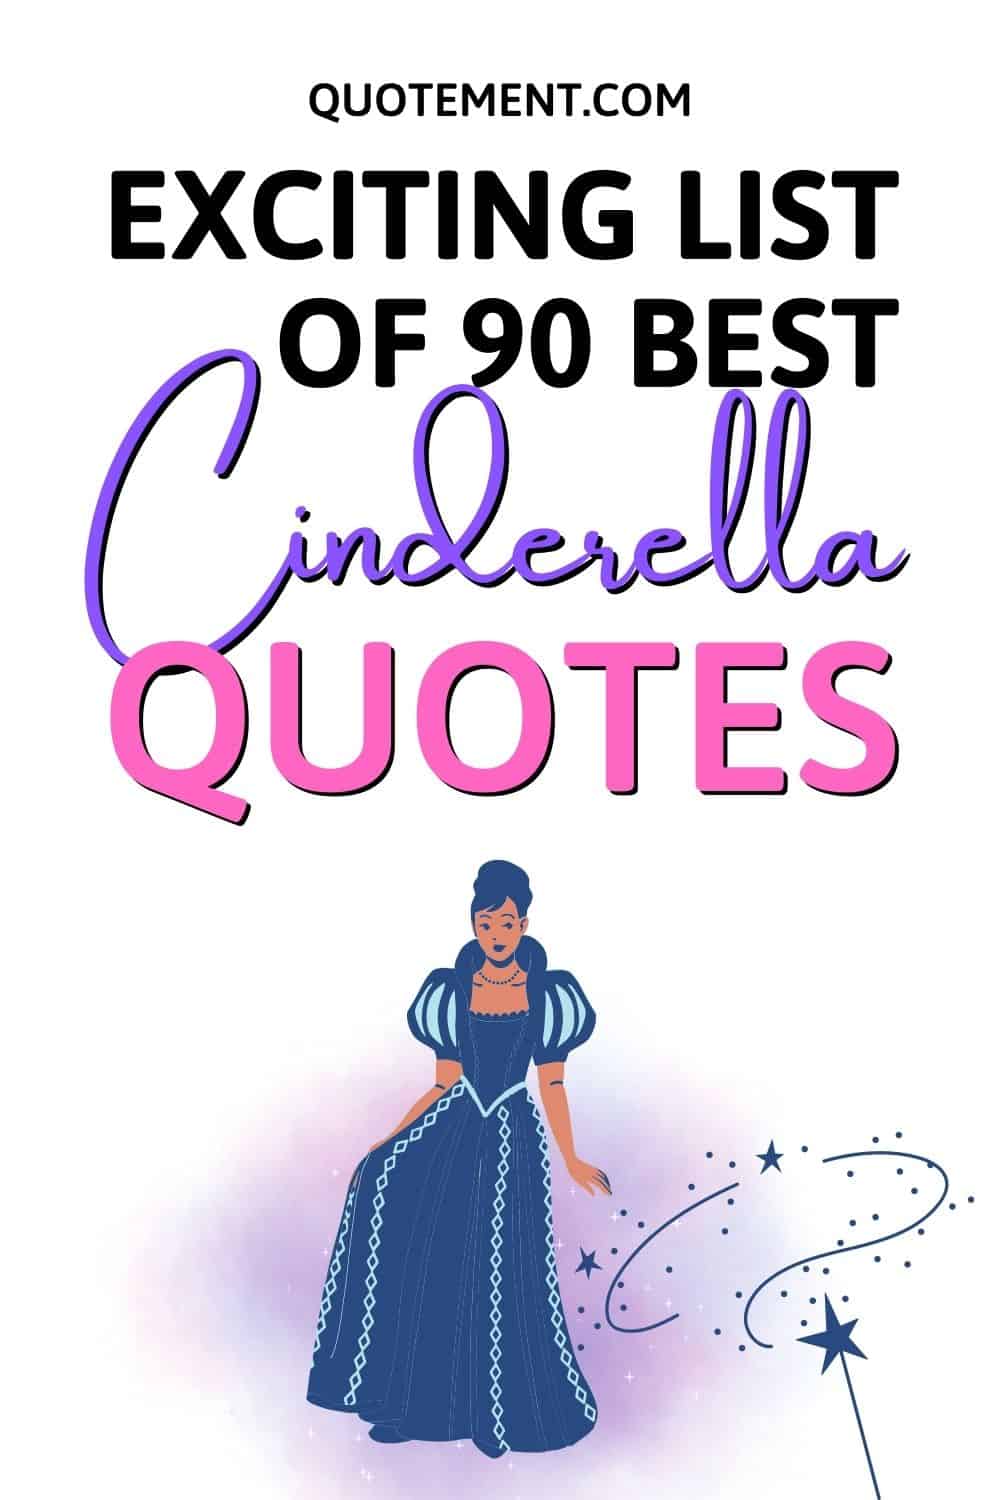 Top 90 Extraordinary Cinderella Quotes For All Generations